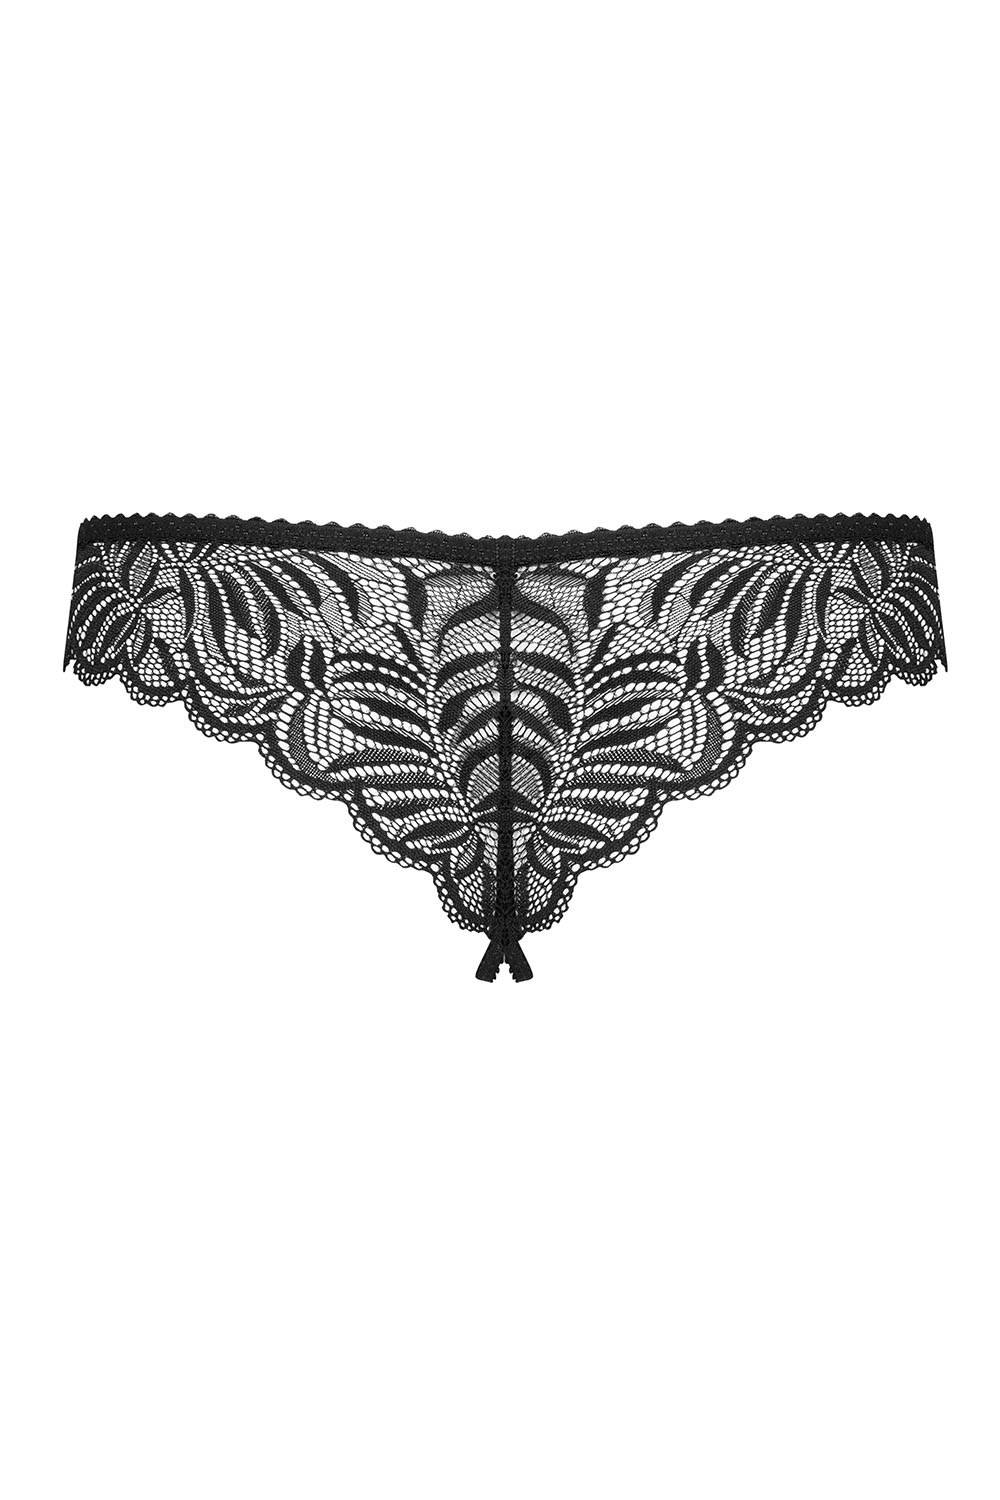 Tanga Obsessive Contica crotchles thong